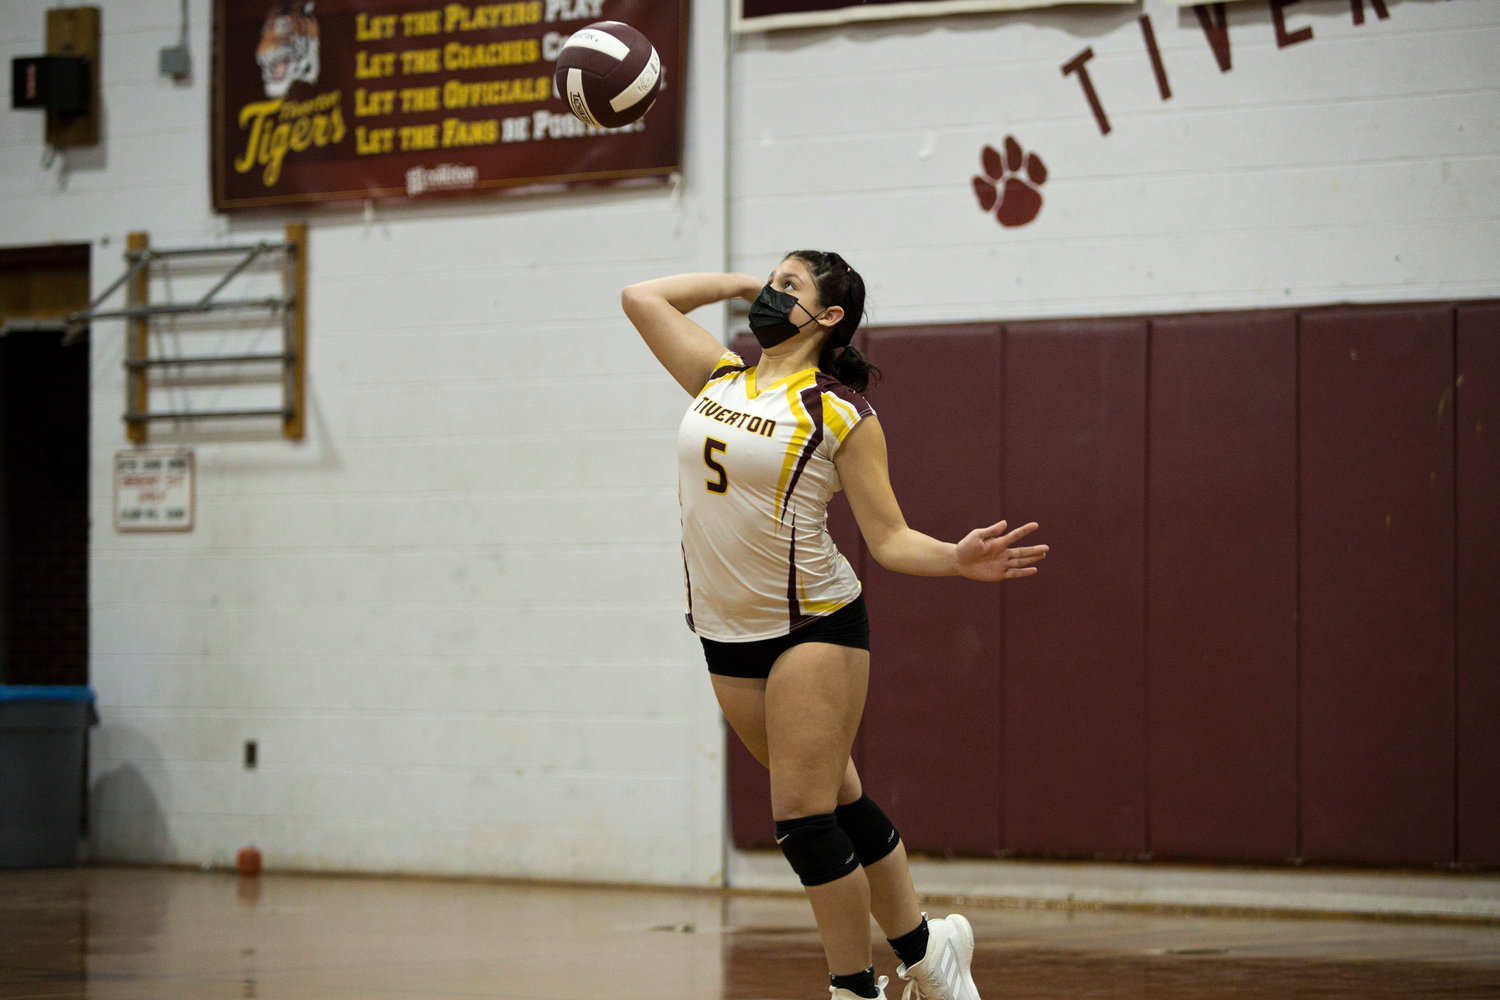 Gabby Torres serves the ball to Paul Cuffee School during Tuesday
night's game.